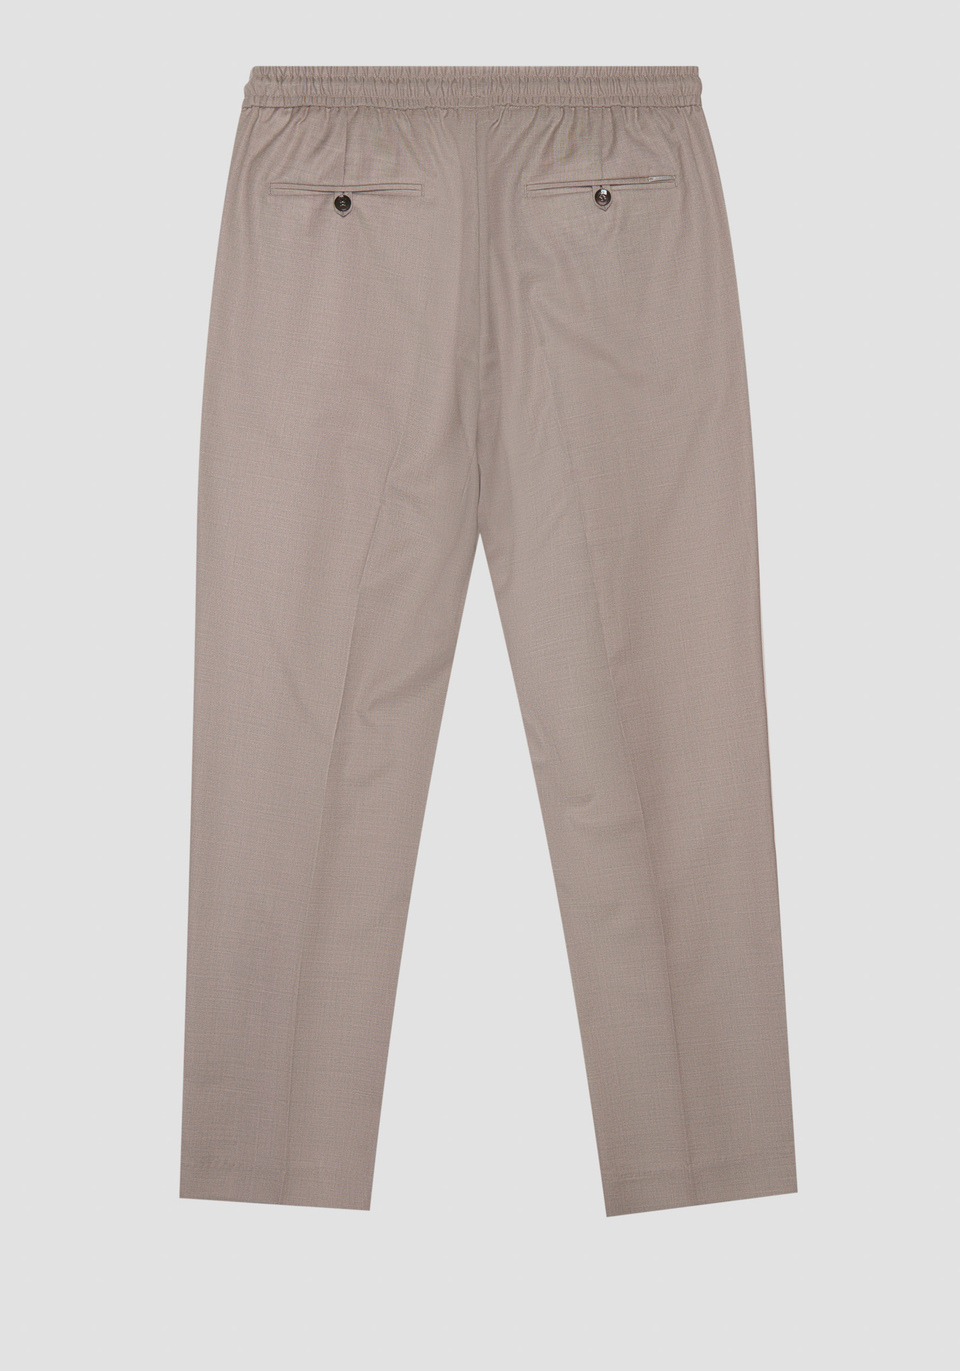 "NEIL" REGULAR FIT TROUSERS IN FLAMED ELASTIC VISCOSE BLEND FABRIC - Antony Morato Online Shop